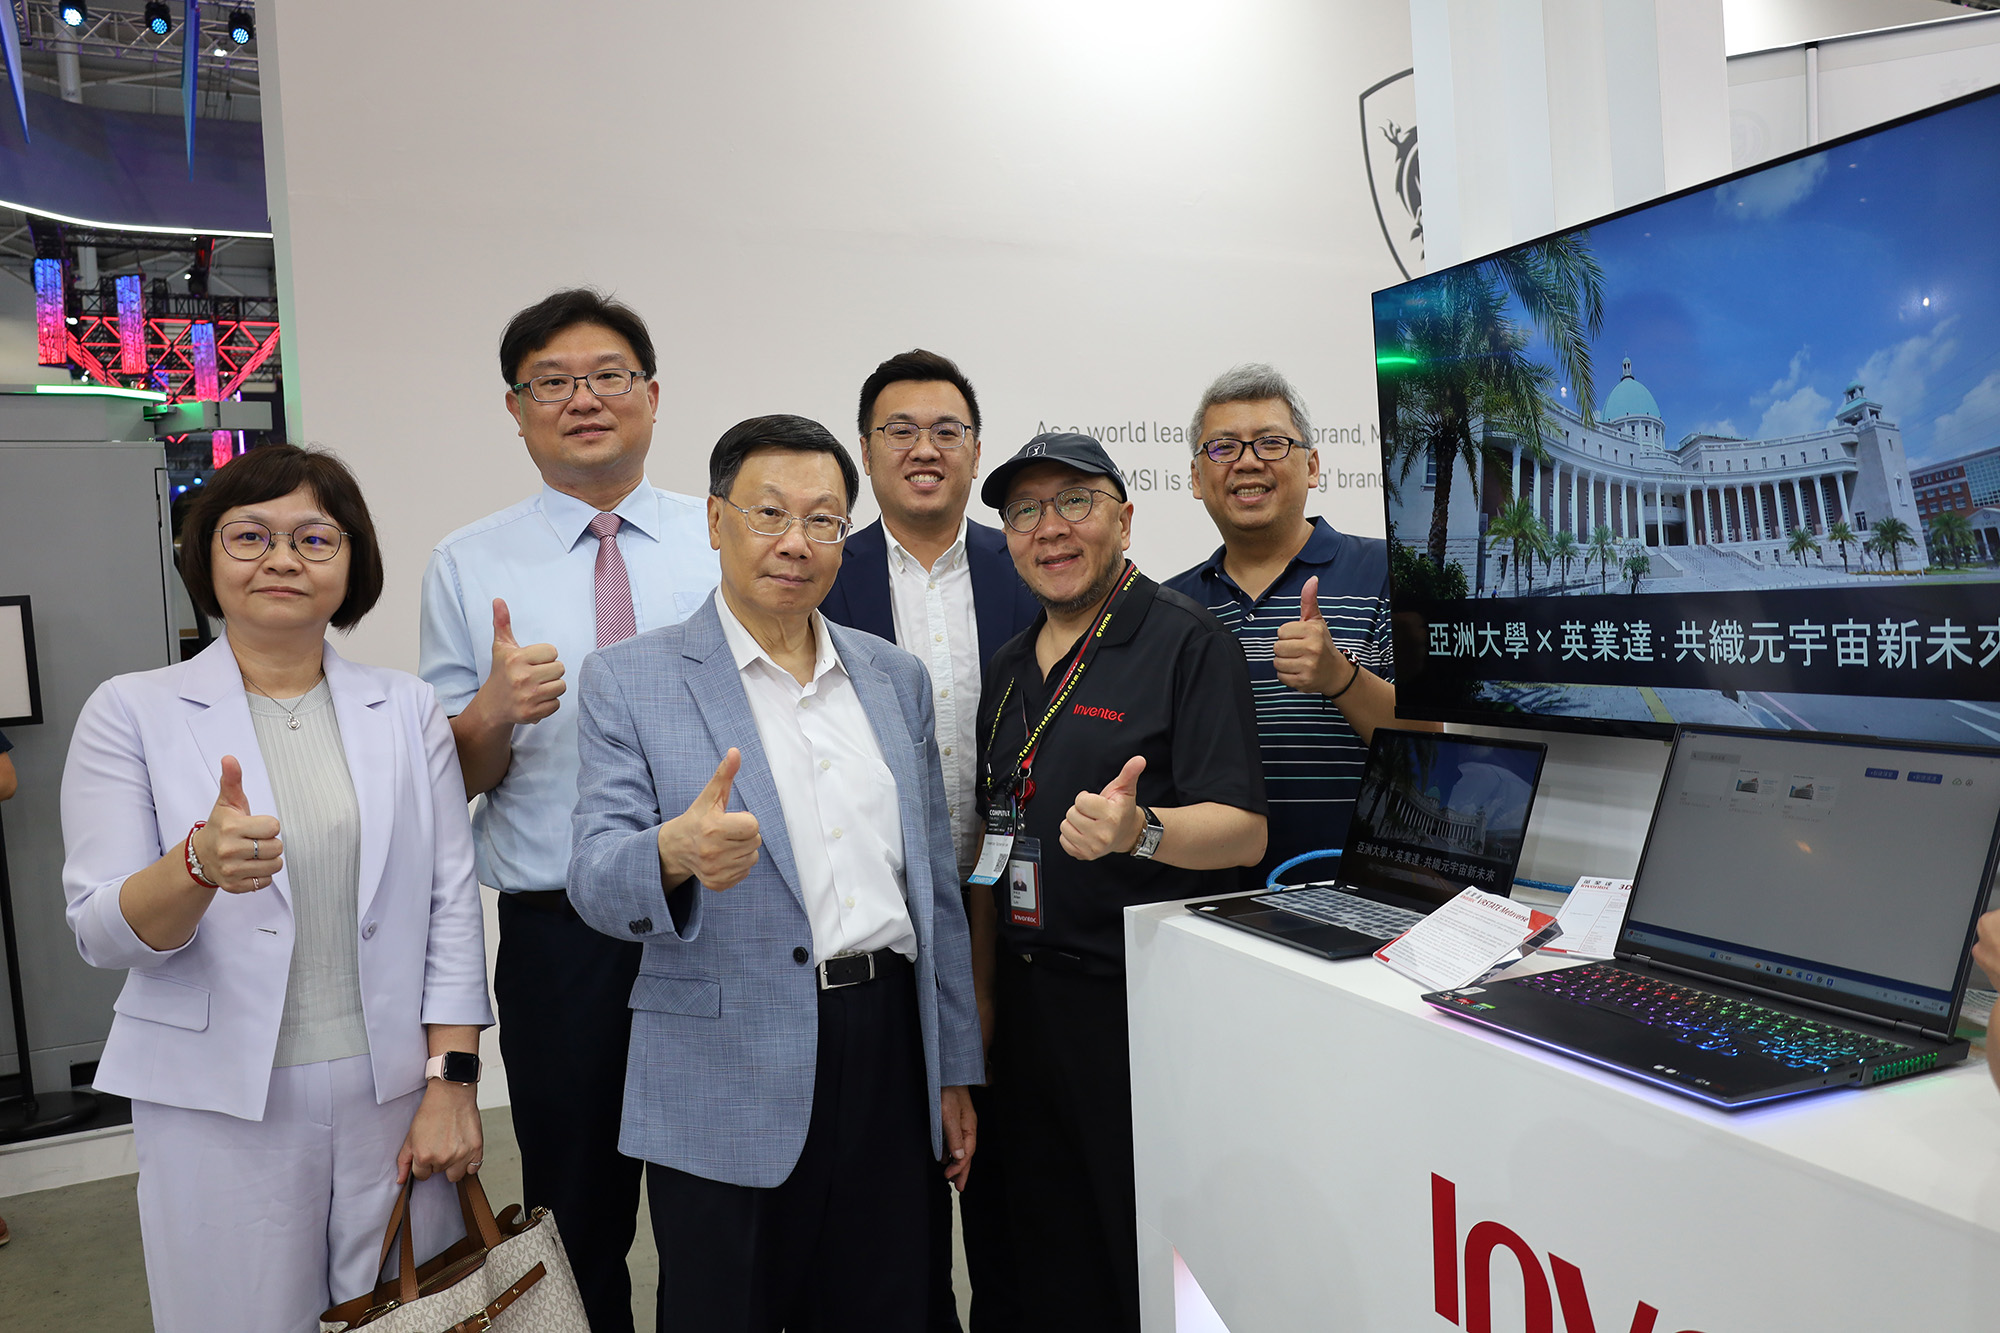 Inventec's display at Computex, featuring their collaboration with Asia University on the "Metaverse Campus." Asia University President Jeffrey J.P. Tsai (left 3) is pictured with university officials and Inventec 's Senior Manager of Metaverse Technology Division, Lin Chao-Liang (right 2).